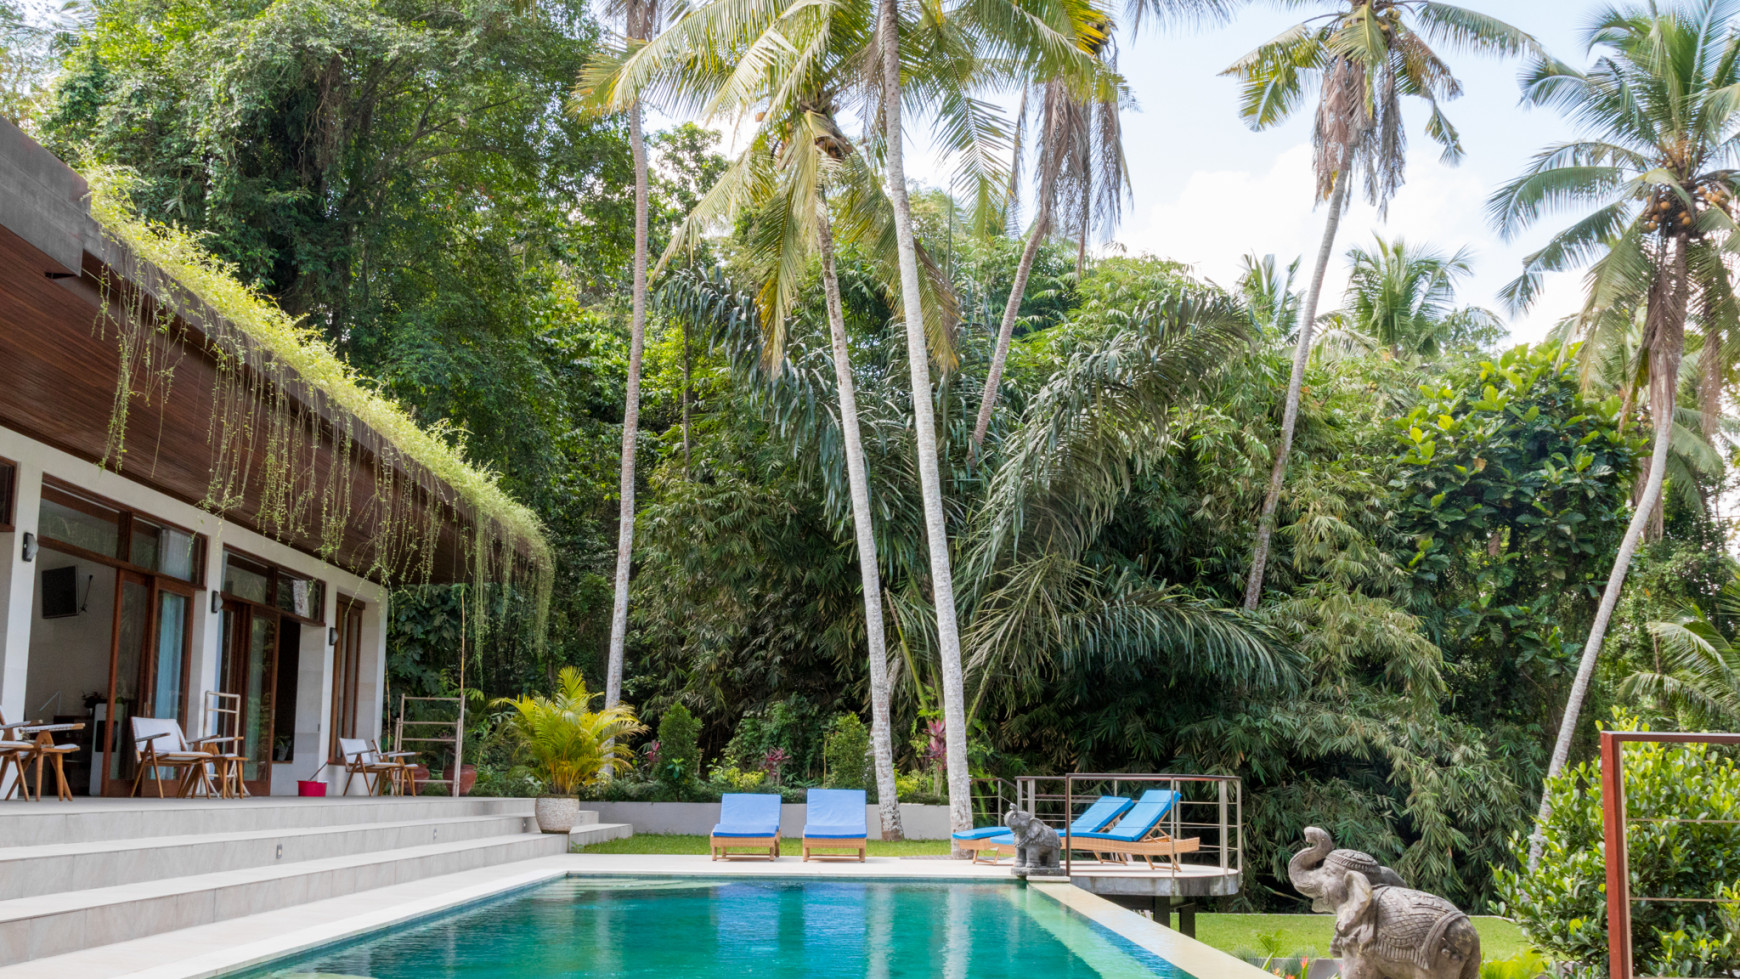 Amazing 6 Bedroom Villa on 1520 sq m of Leasehold Land with Ravine View 10 Minutes from Ubud Center